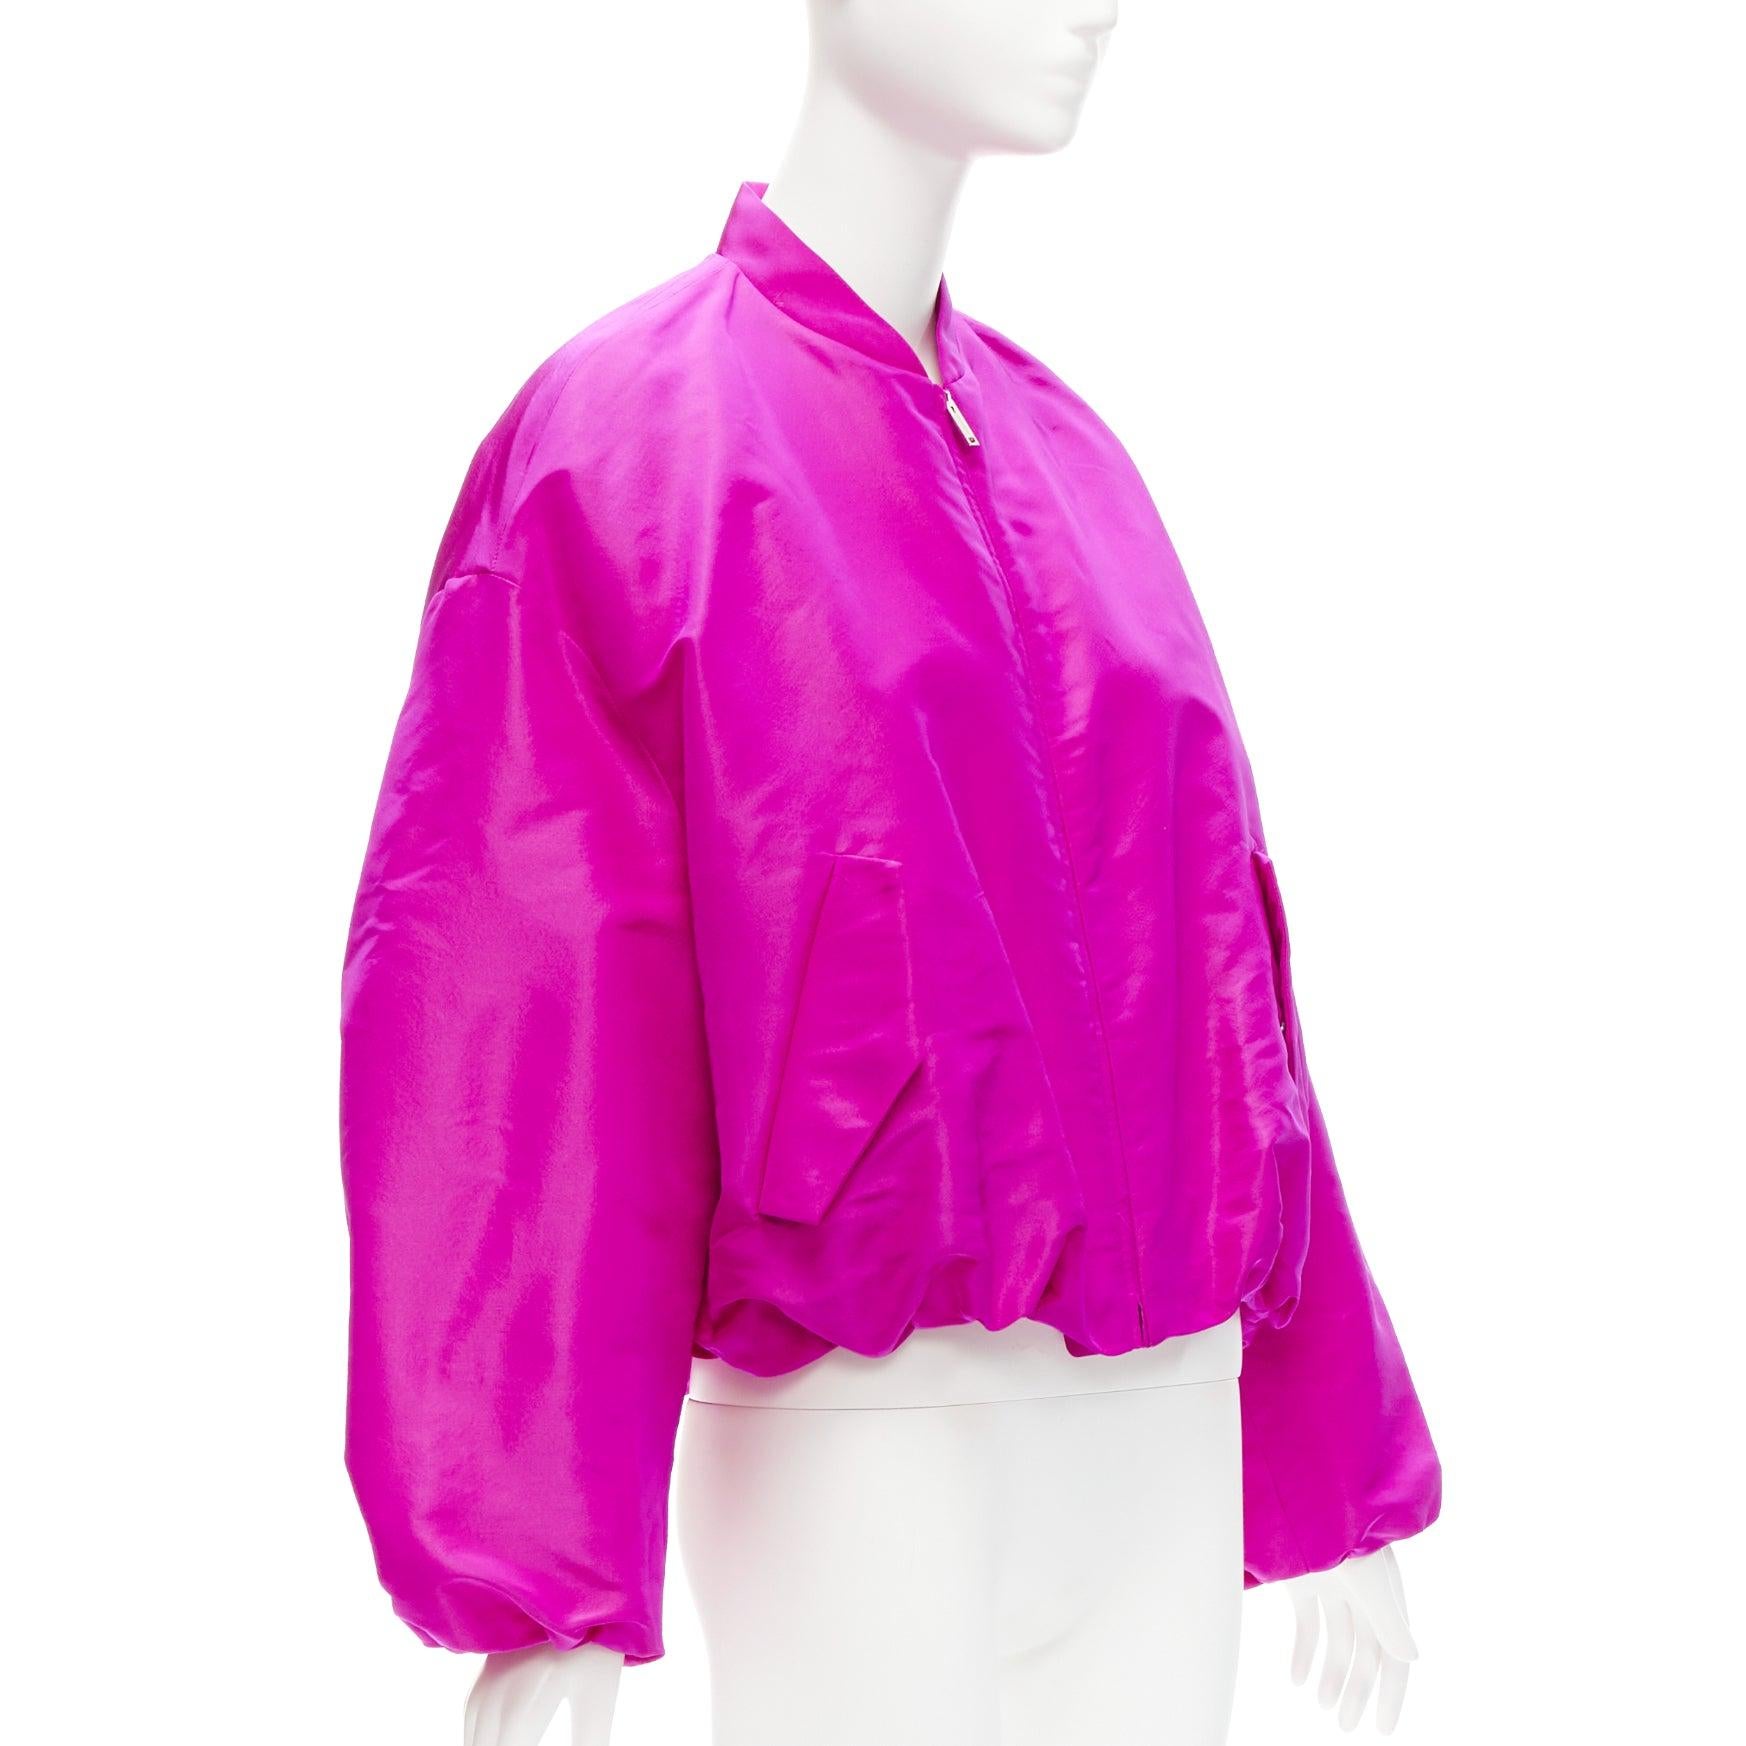 VALENTINO Runway PP Pink silk satin cocoon cropped bomber jacket blouson IT38 XS
Reference: TGAS/D00896
Brand: Valentino
Designer: Pier Paolo Piccioli
Collection: 2021 - Runway
Material: Silk
Color: Pink
Pattern: Solid
Closure: Zip
Lining: Pink